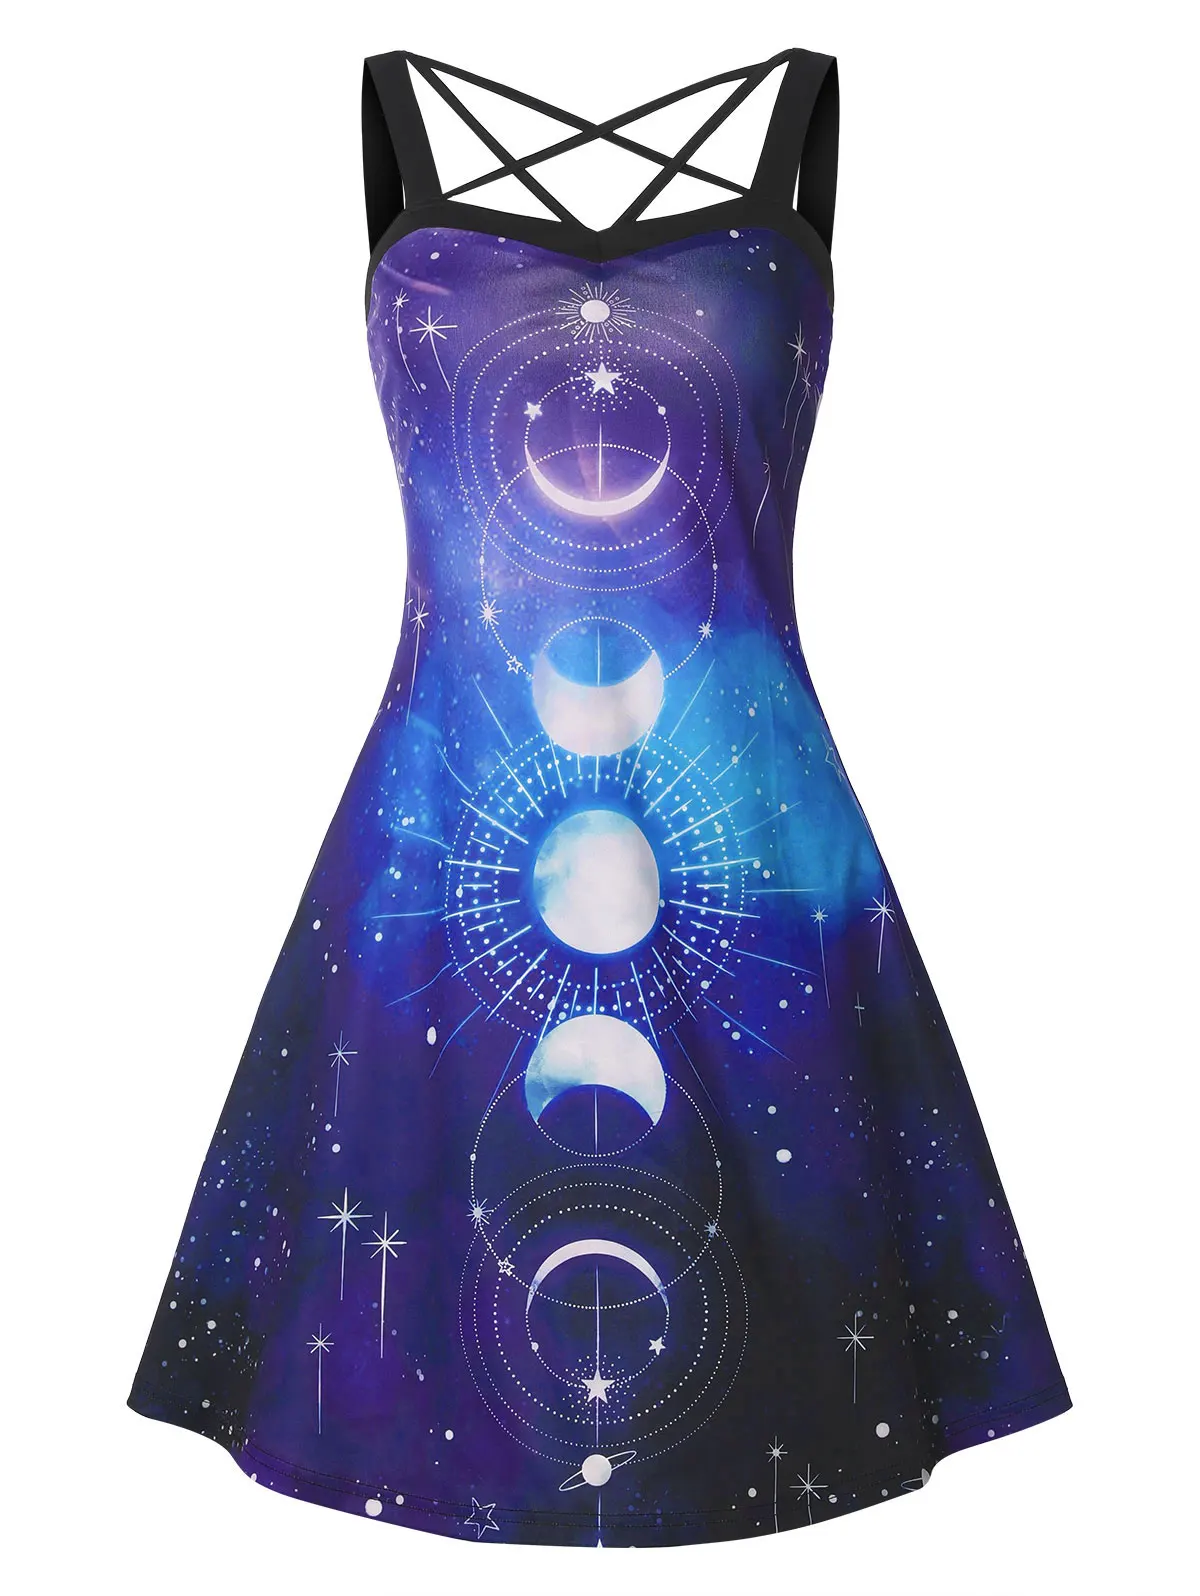 Women Moon Phase Galaxy Print Crossover Dress Casual Party A-Line Knee-Length Dresses Summer Robe New